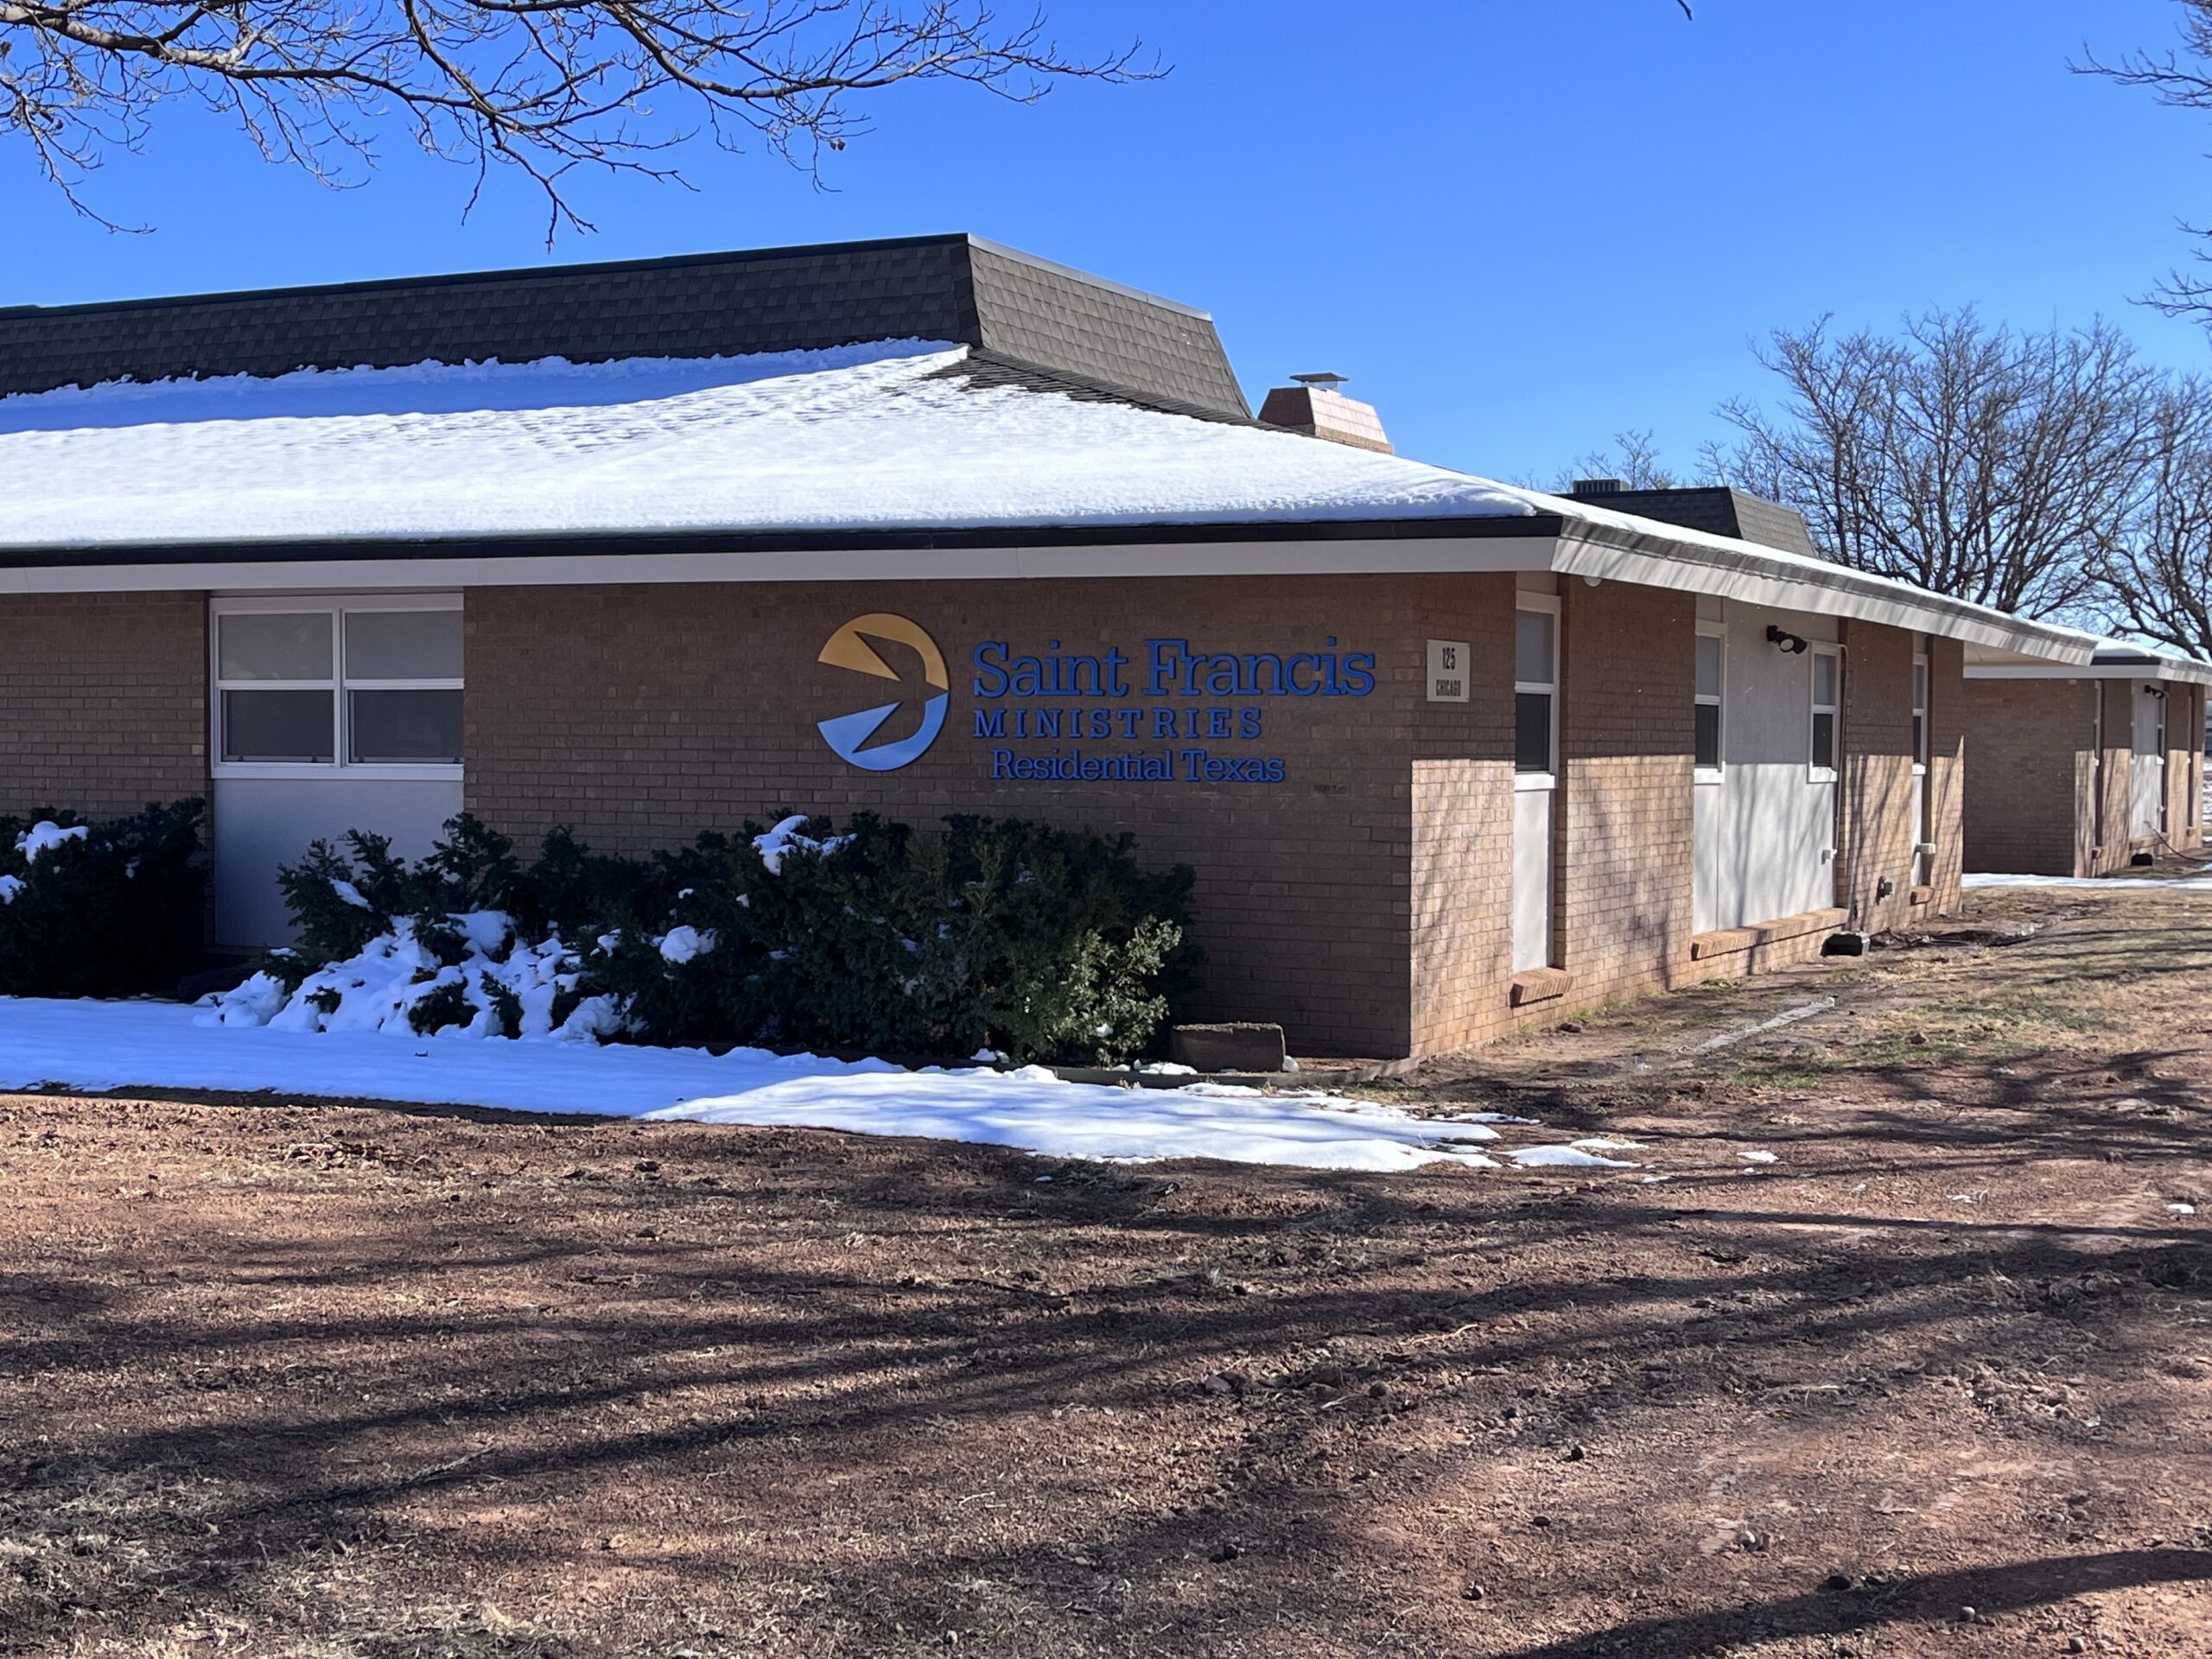 A one-story brick building with the sign "Saint Francis Ministries Residential Texas" on the front wall. Snow is on parts of the ground and bushes near the building. Trees without leaves are visible in the background under a clear blue sky.